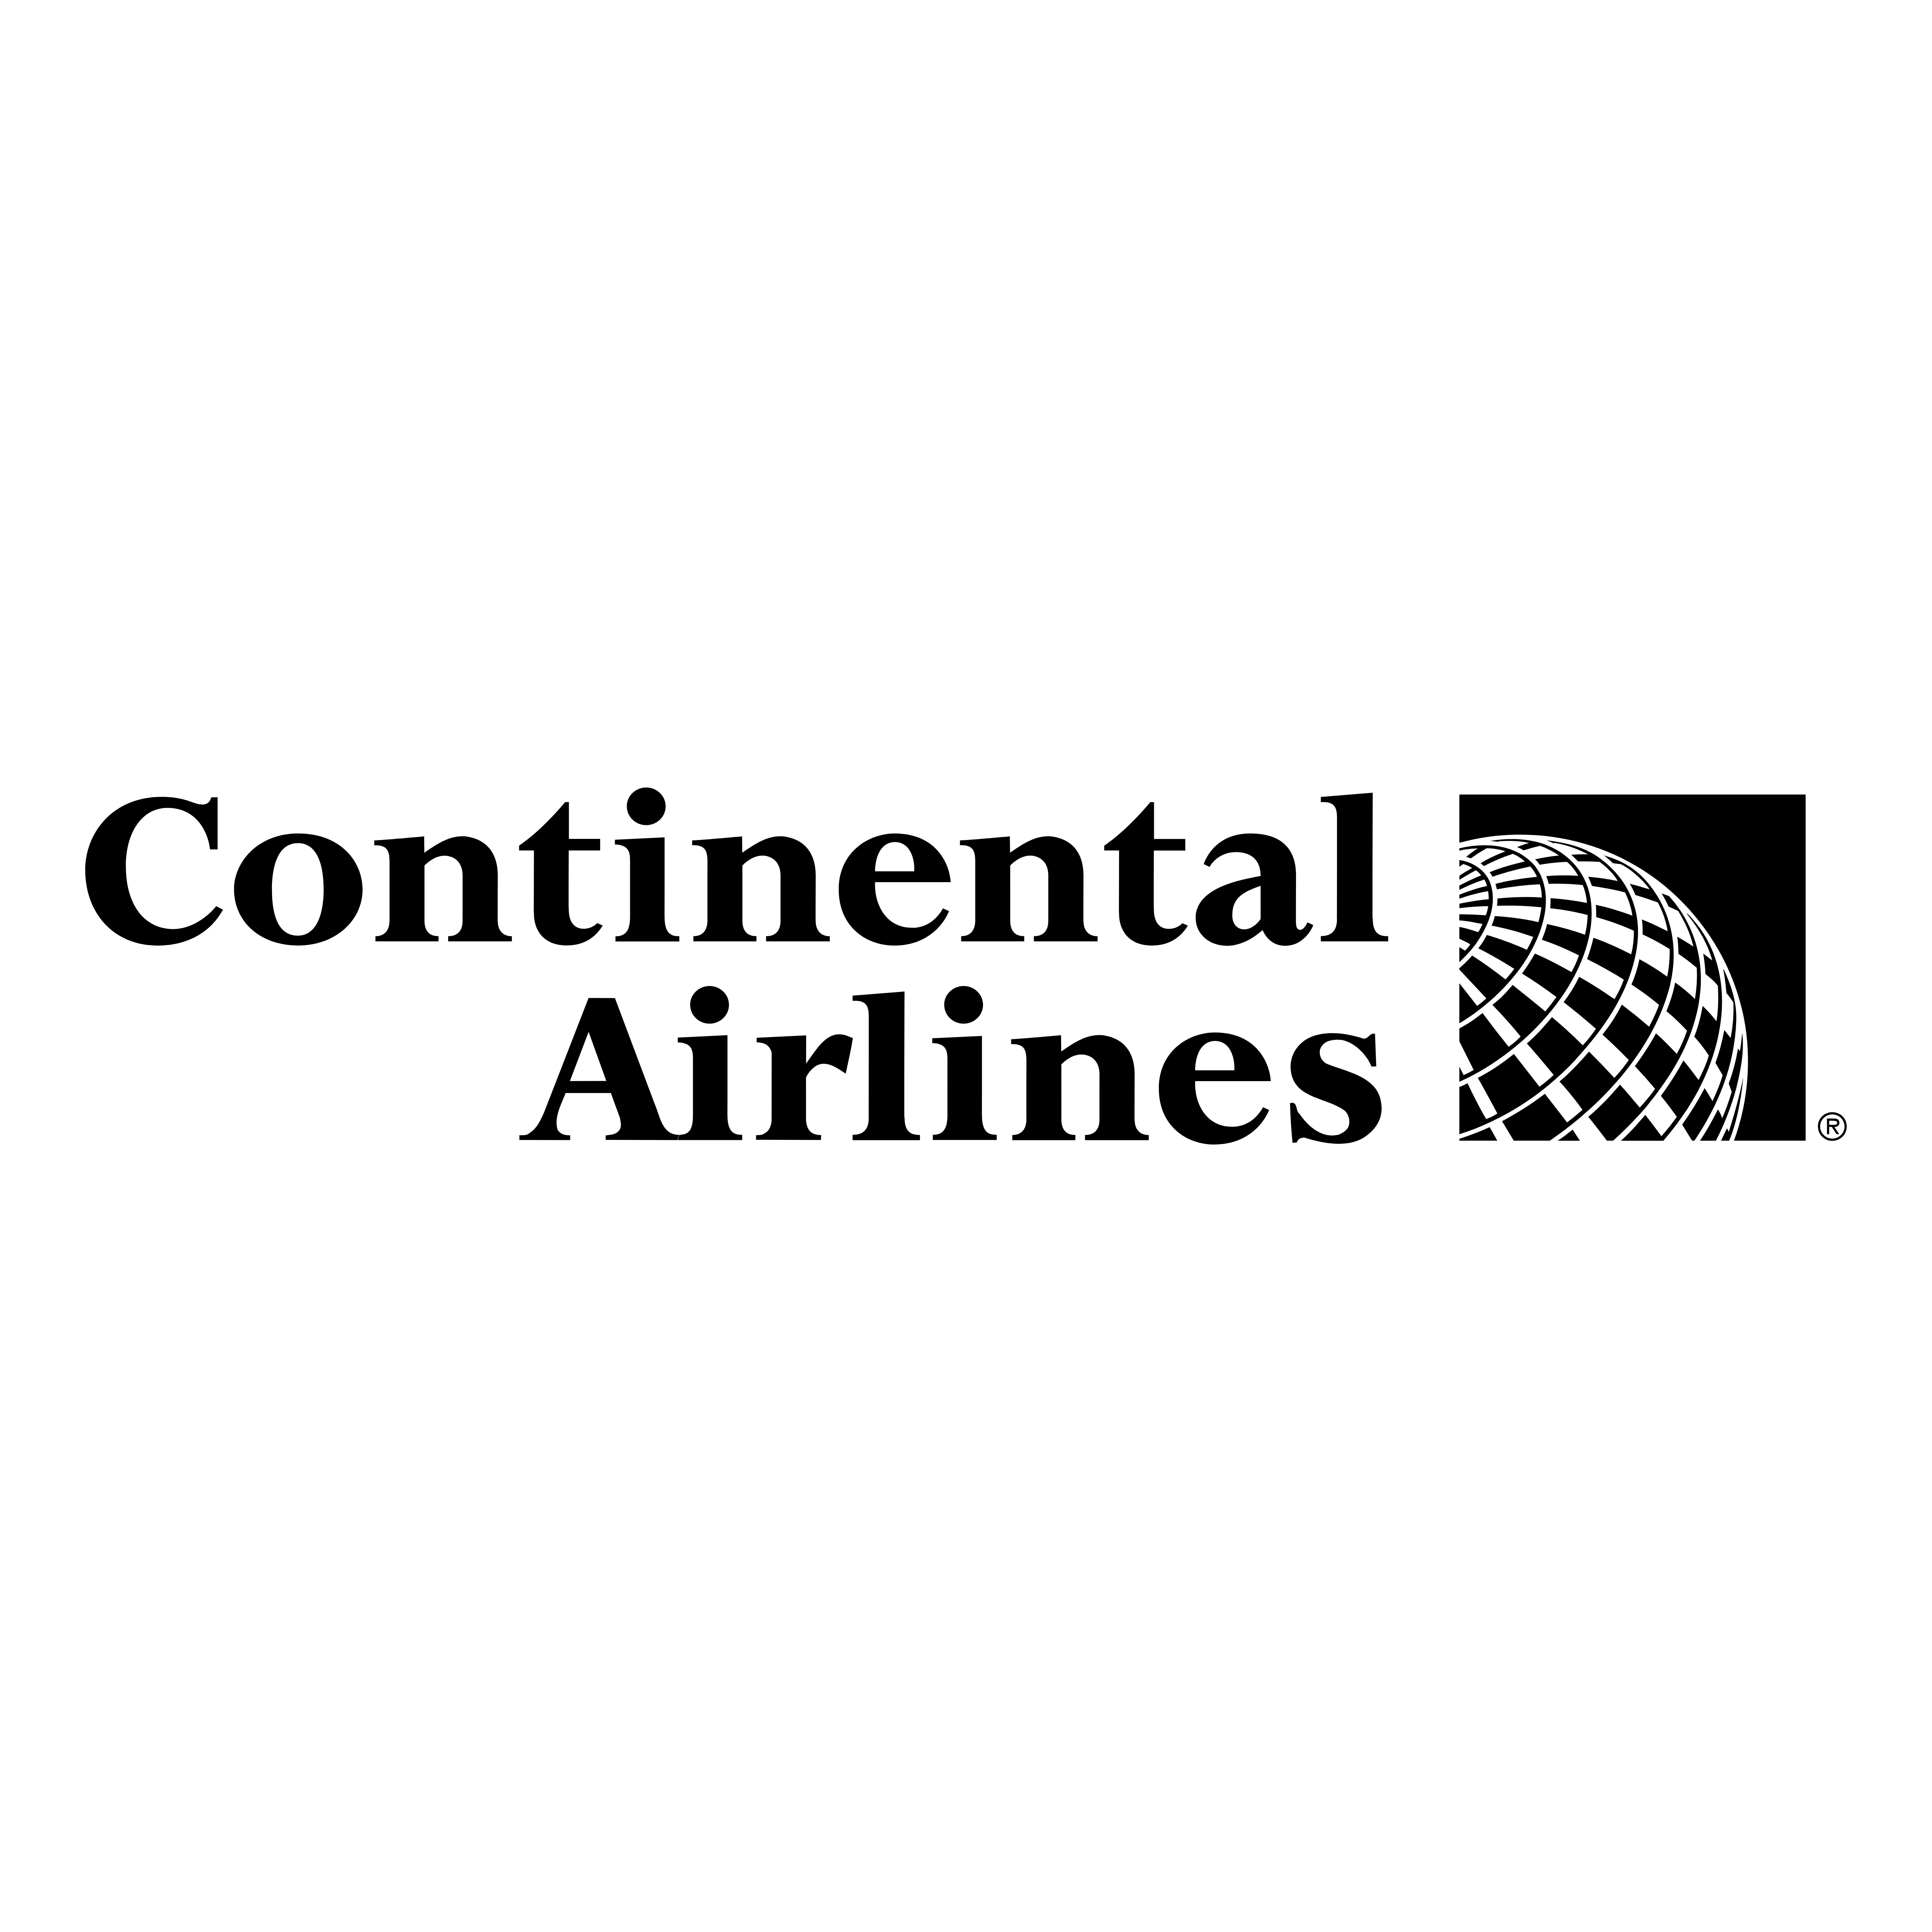 Continental Airlines Logo - Continental Airlines – Logos Download